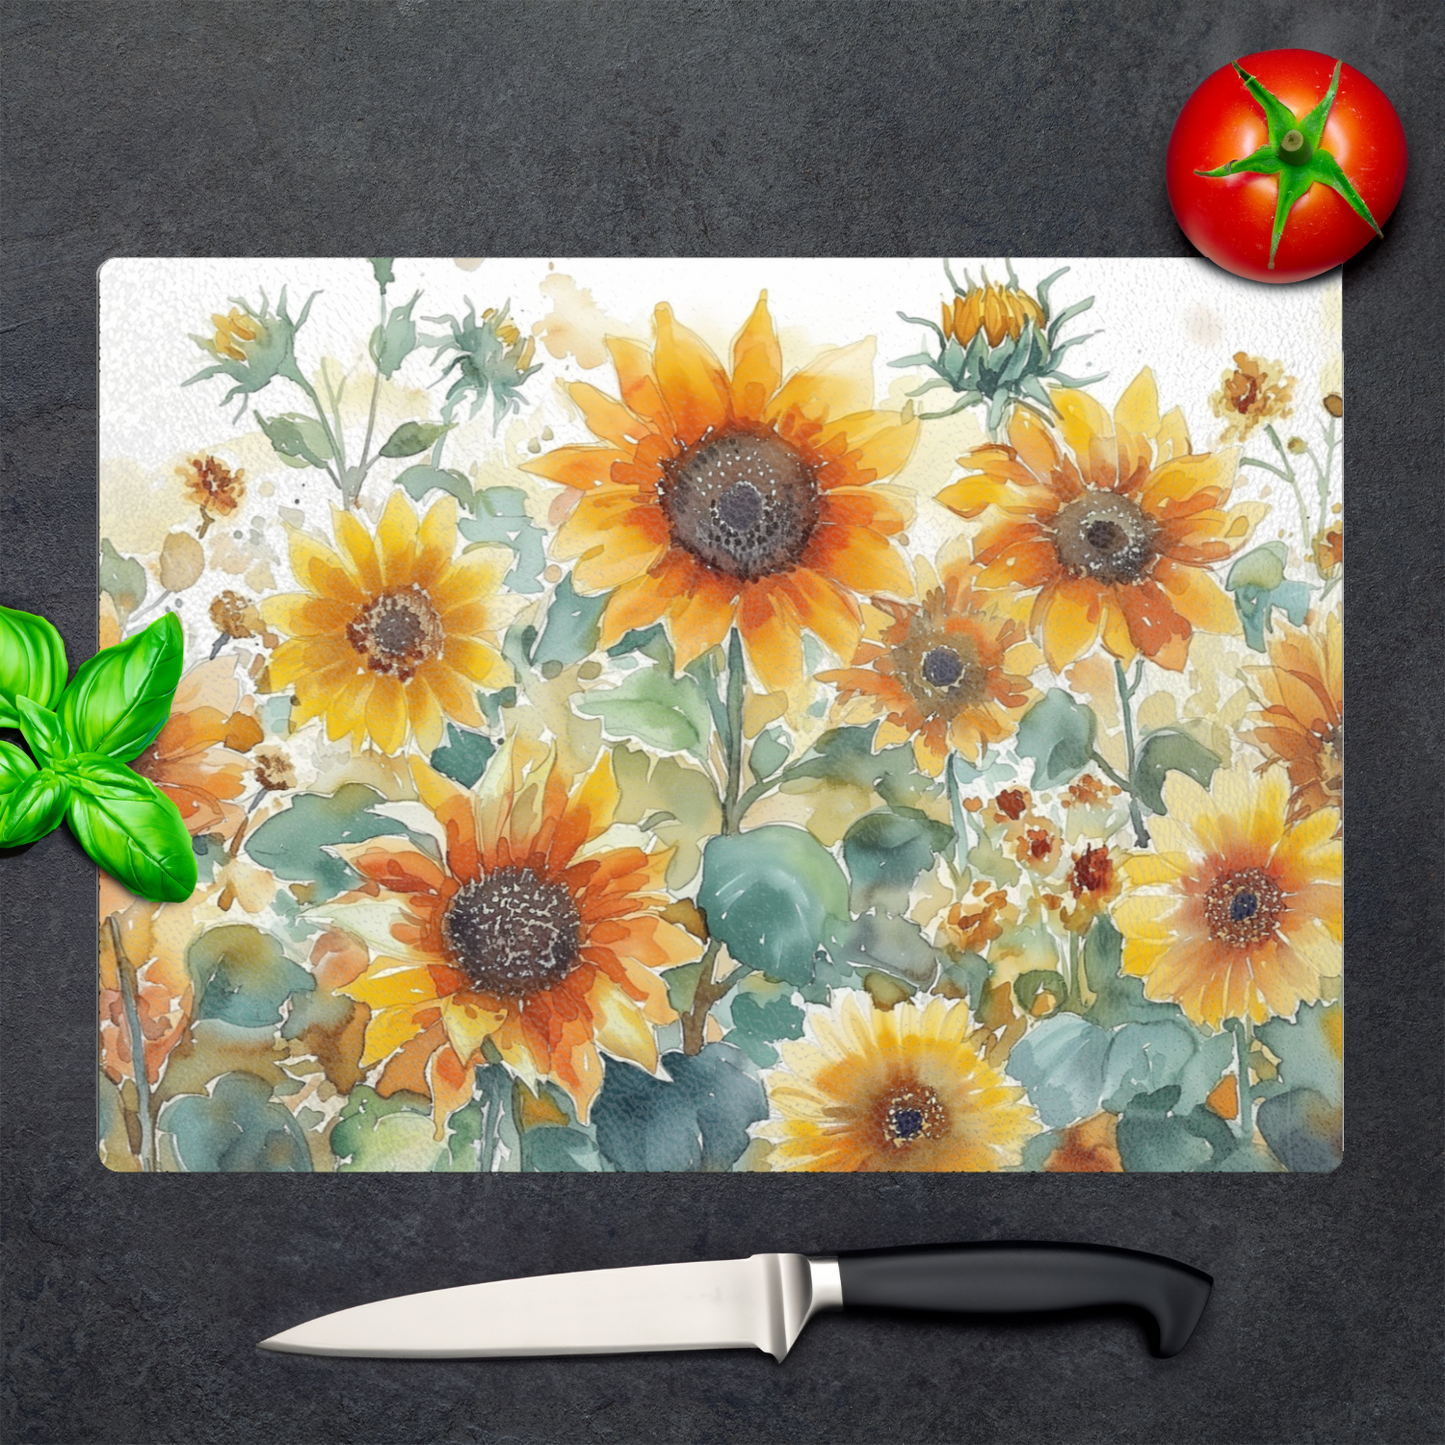 Sunflowers Counter Art, Heat Tolerant Tempered Glass Cutting Board 15” x 11” Made in the USA